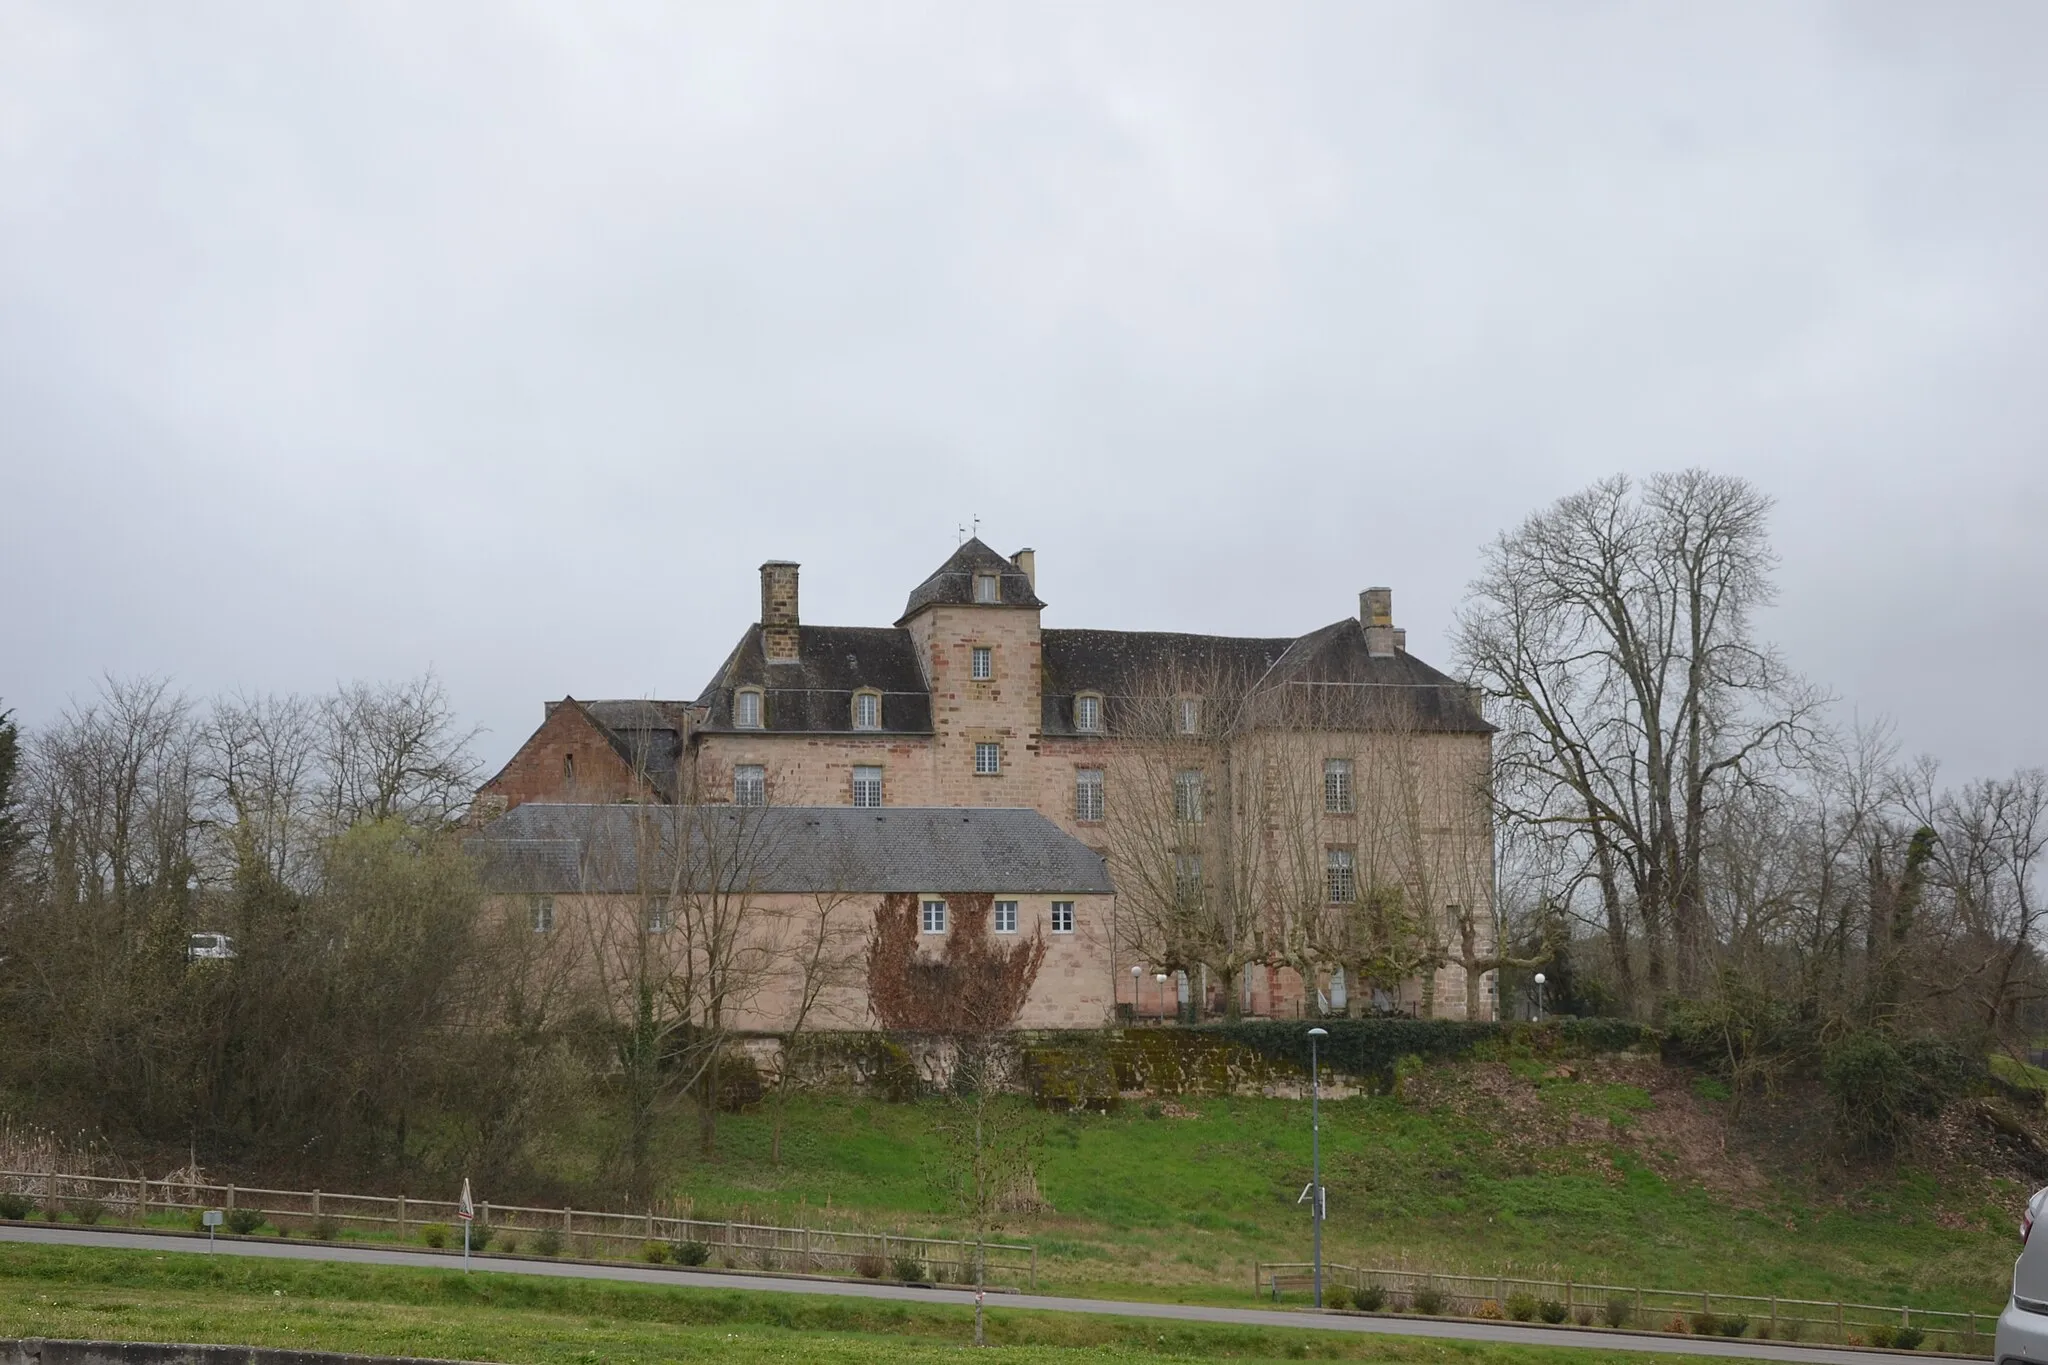 Image of Limousin